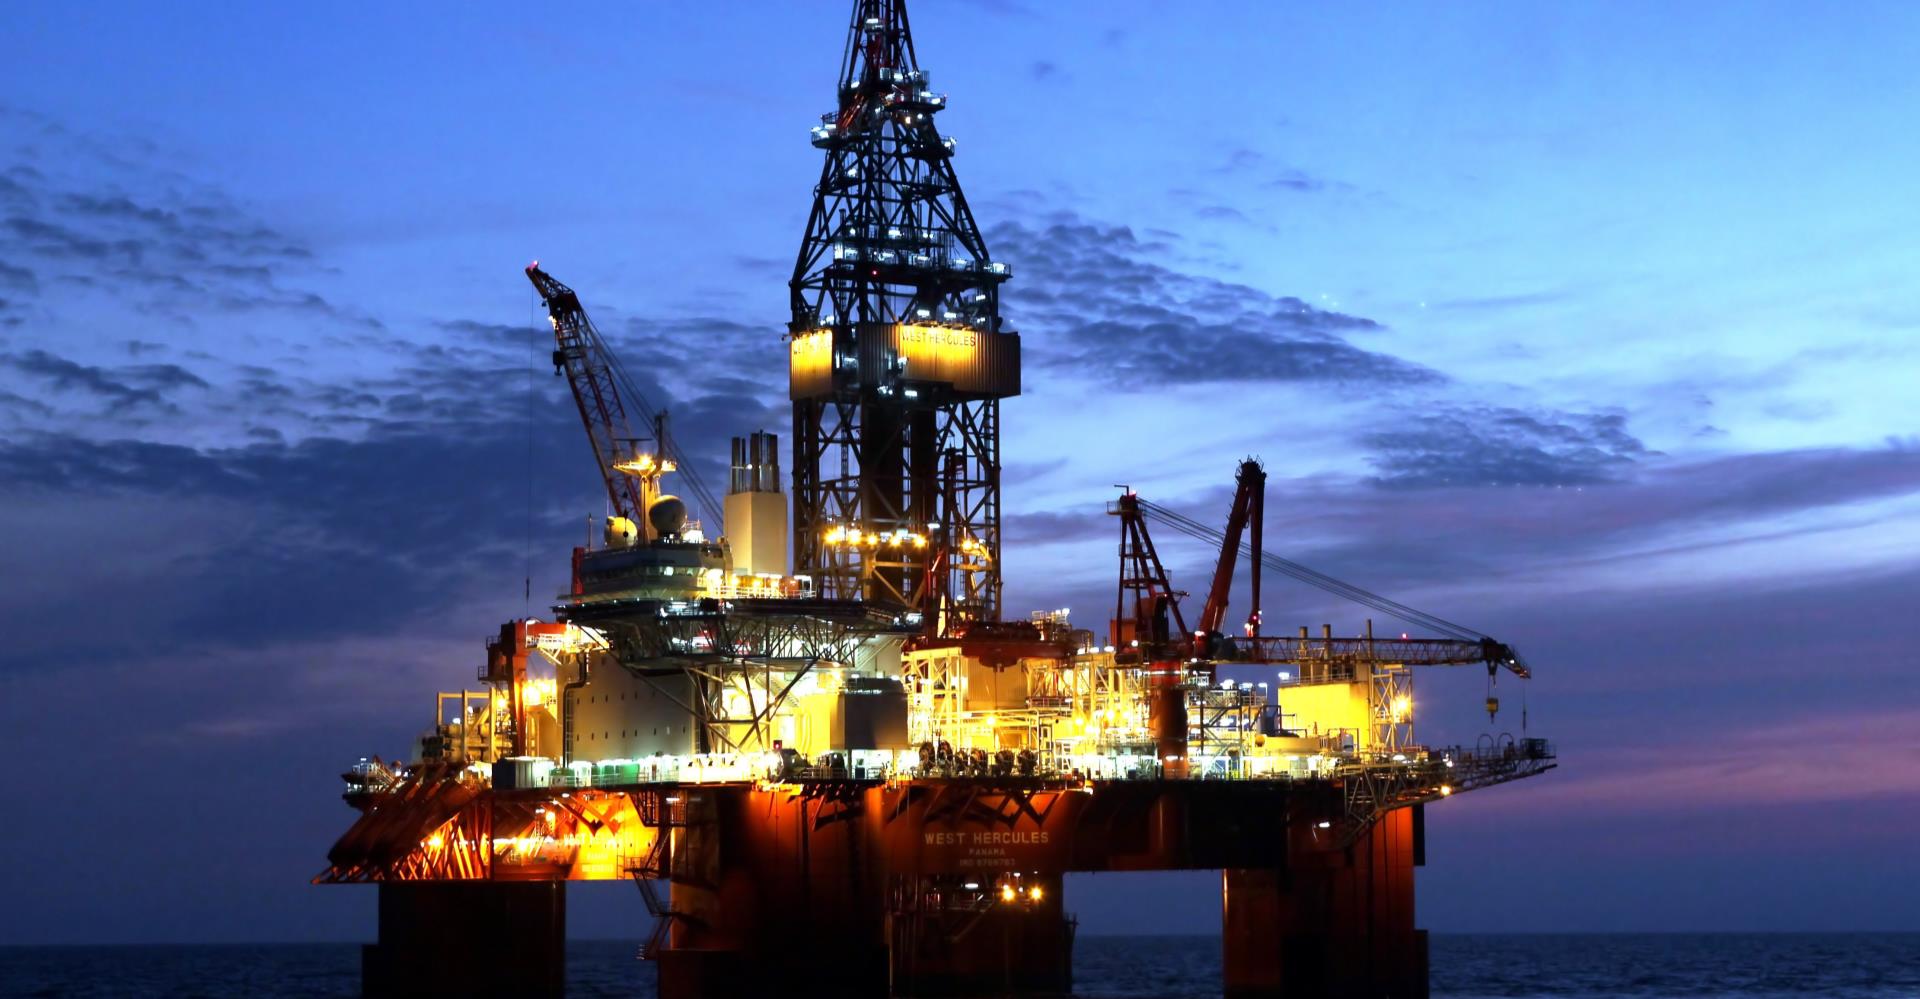 2022 saw higher offshore rig activity, Baker Hughes reports